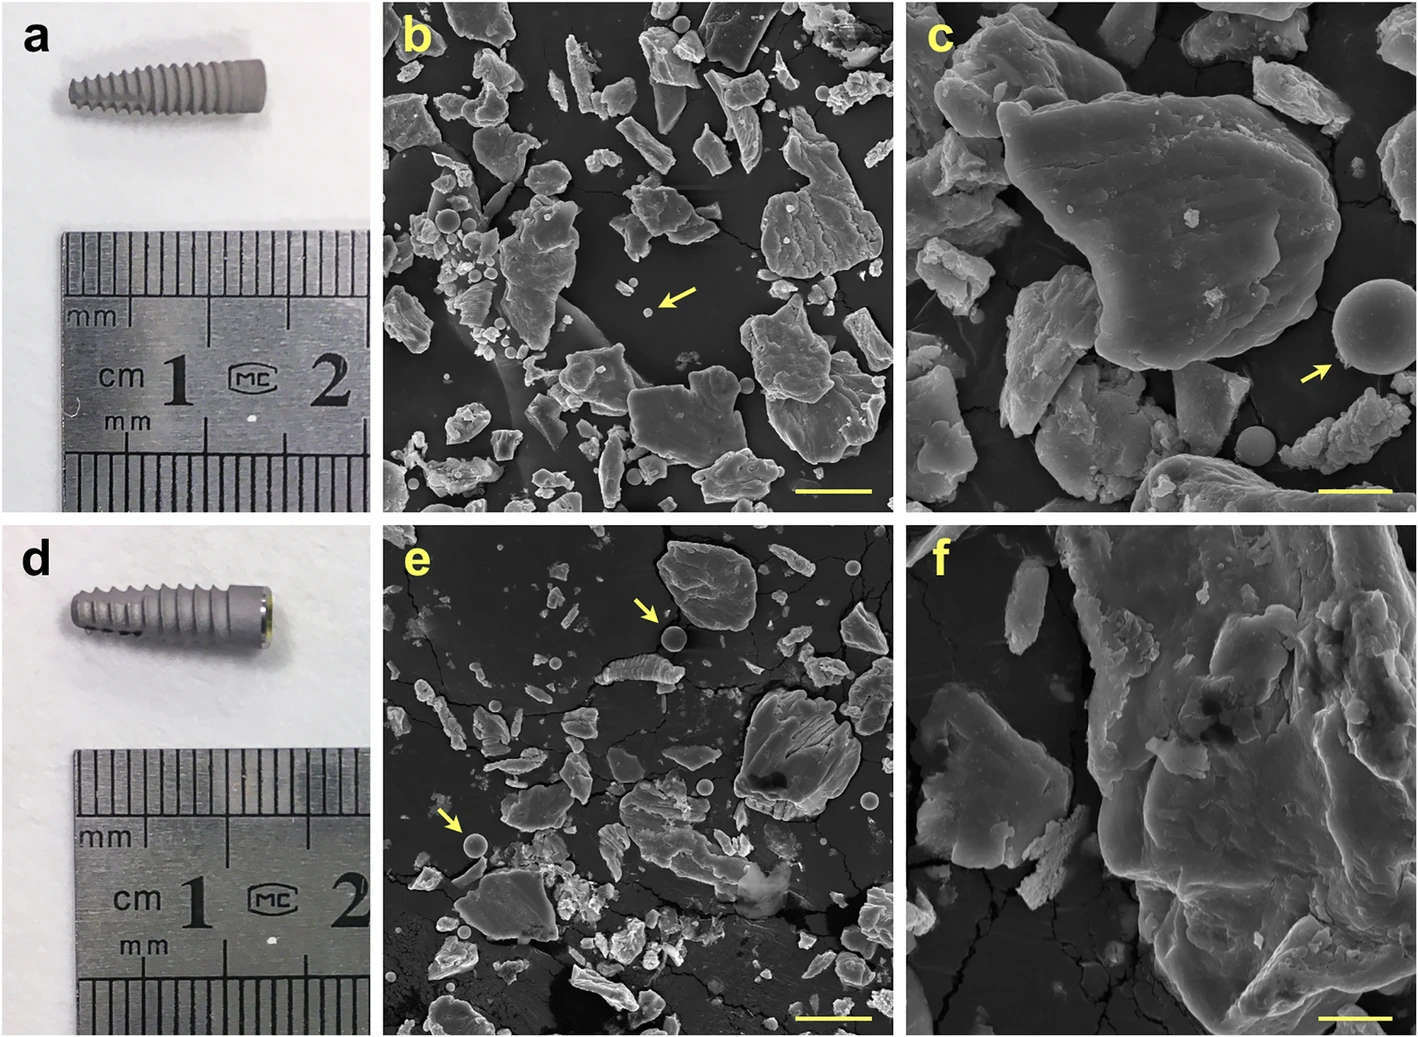 Figure 1. Representative photo of implants and SEM images of particles produced by mock implantoplasty procedure. a–c Straumann 021.4512, bone level, diameter 4.1 mm, regular CrossFit®, SLA® 12 mm Roxolid® (commercially pure grade 4 titanium). d–f Biohorizons PBR 50105, RBT 5.0 × 10.5 mm, 5.7 Platform (grade 5 titanium alloy). Arrows indicate titanium oxide spheres. Scale bar represents 20 and 5 μm for low and high magnification respectively